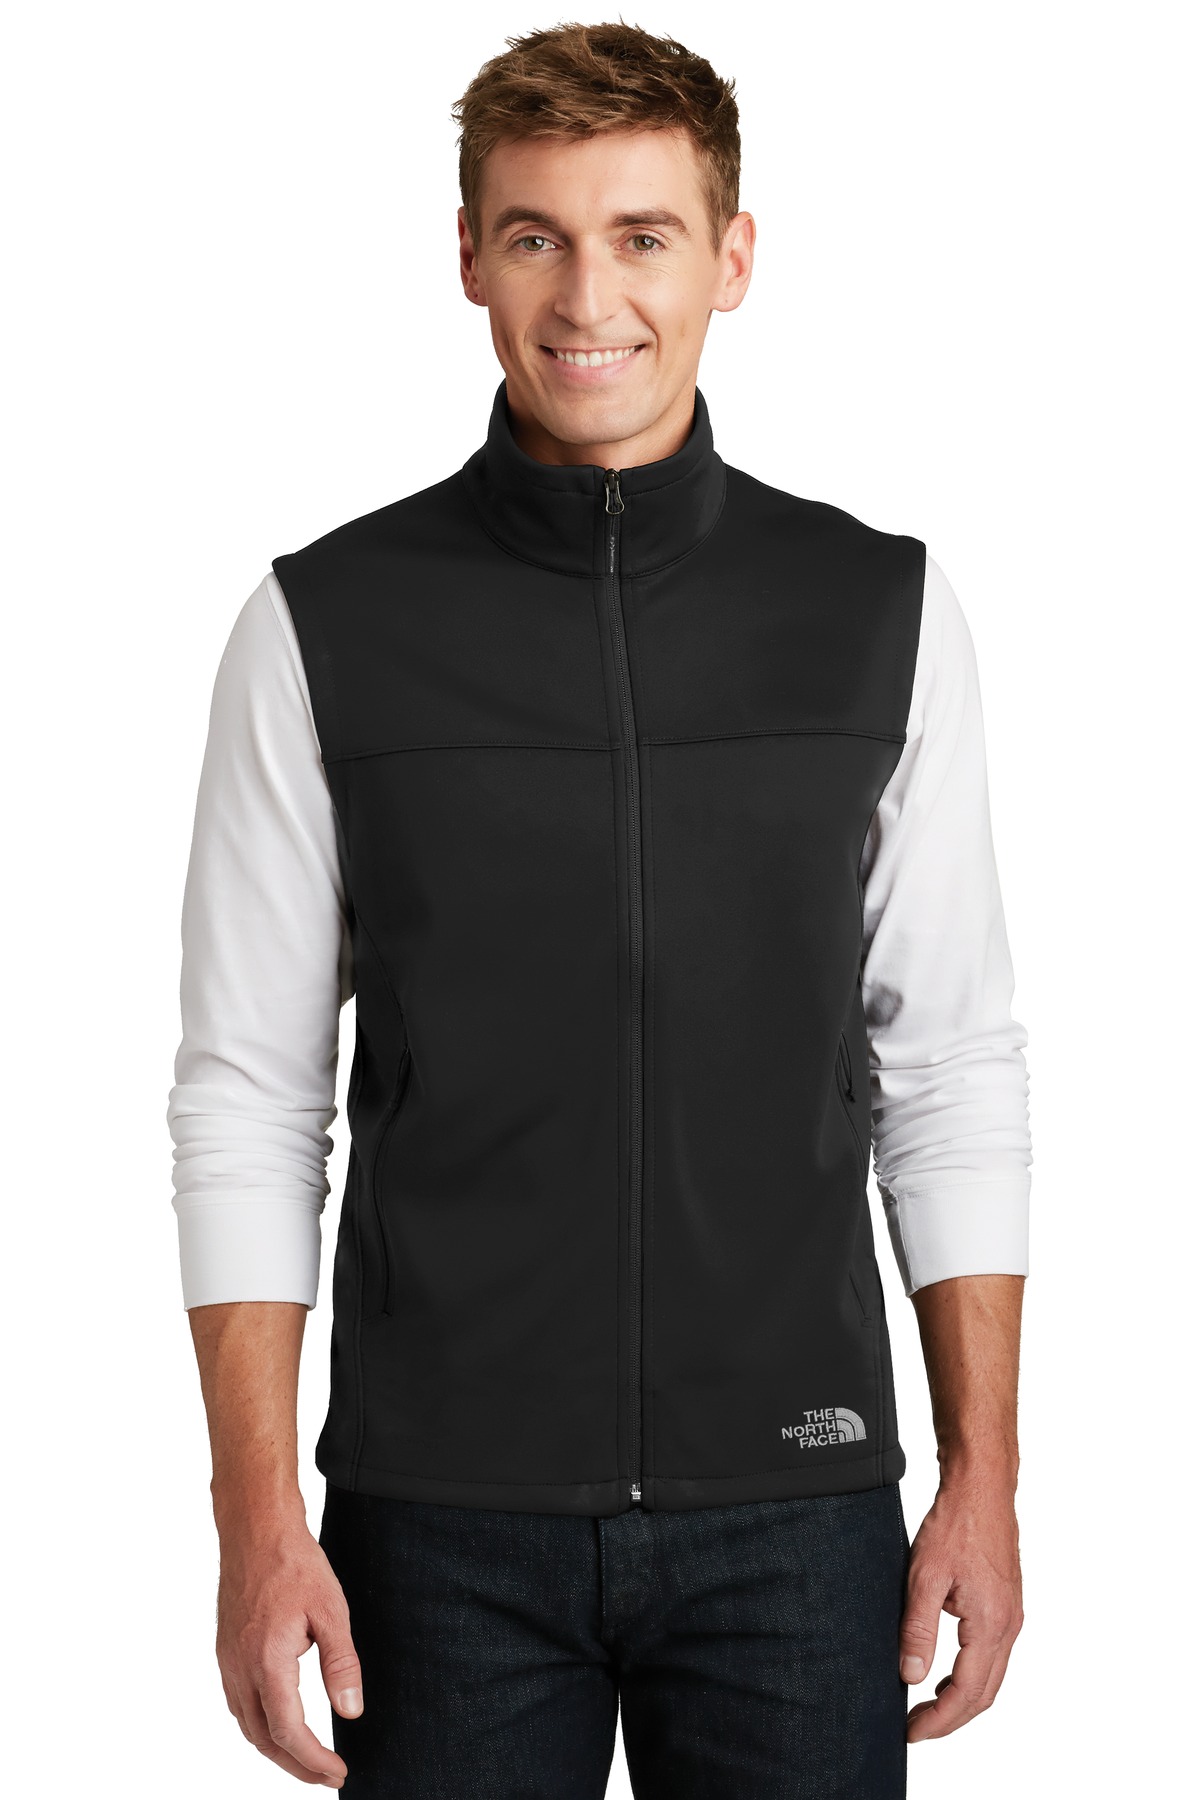 Buy The North Face Ridgewall Soft Shell Vest - The North Face Online at ...